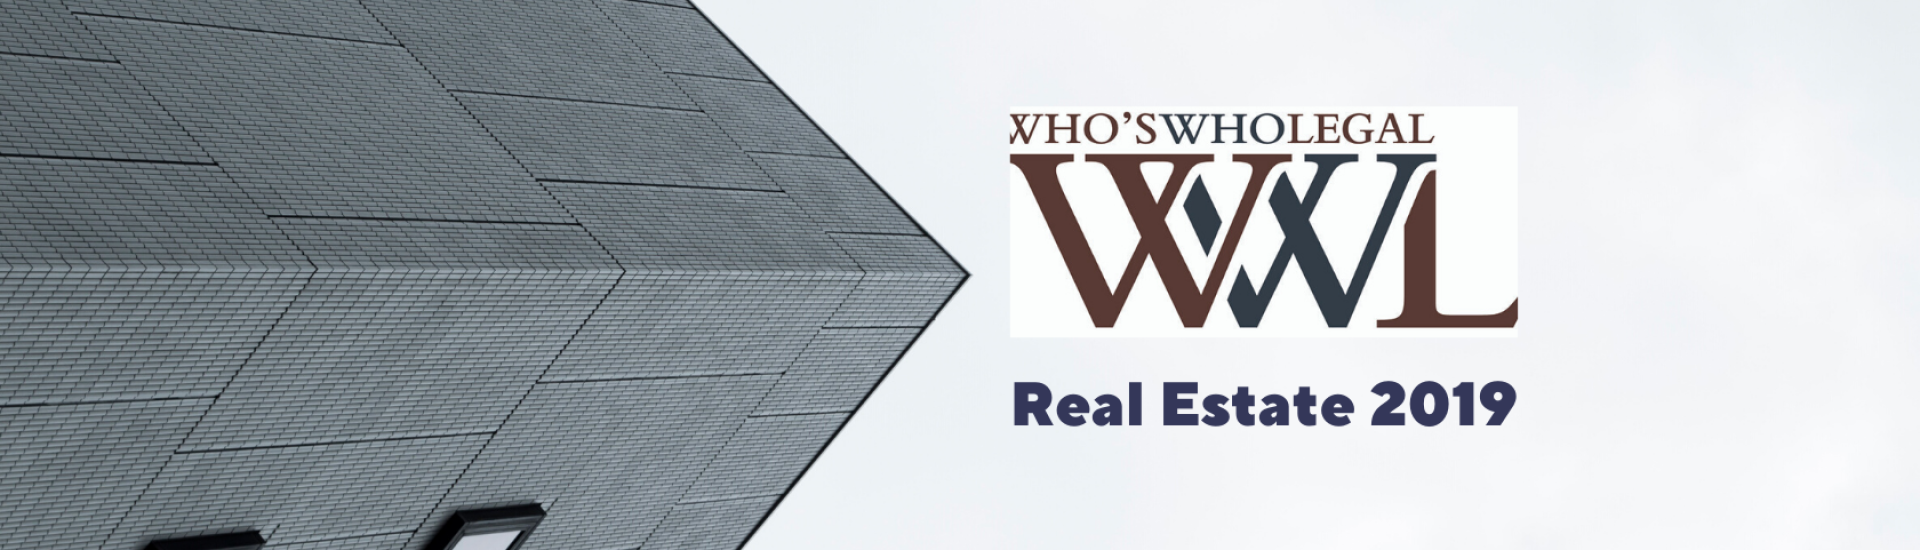 Yerzhan Yessimkhanov ranked 
among best real estate lawyers 
in WWL 2019